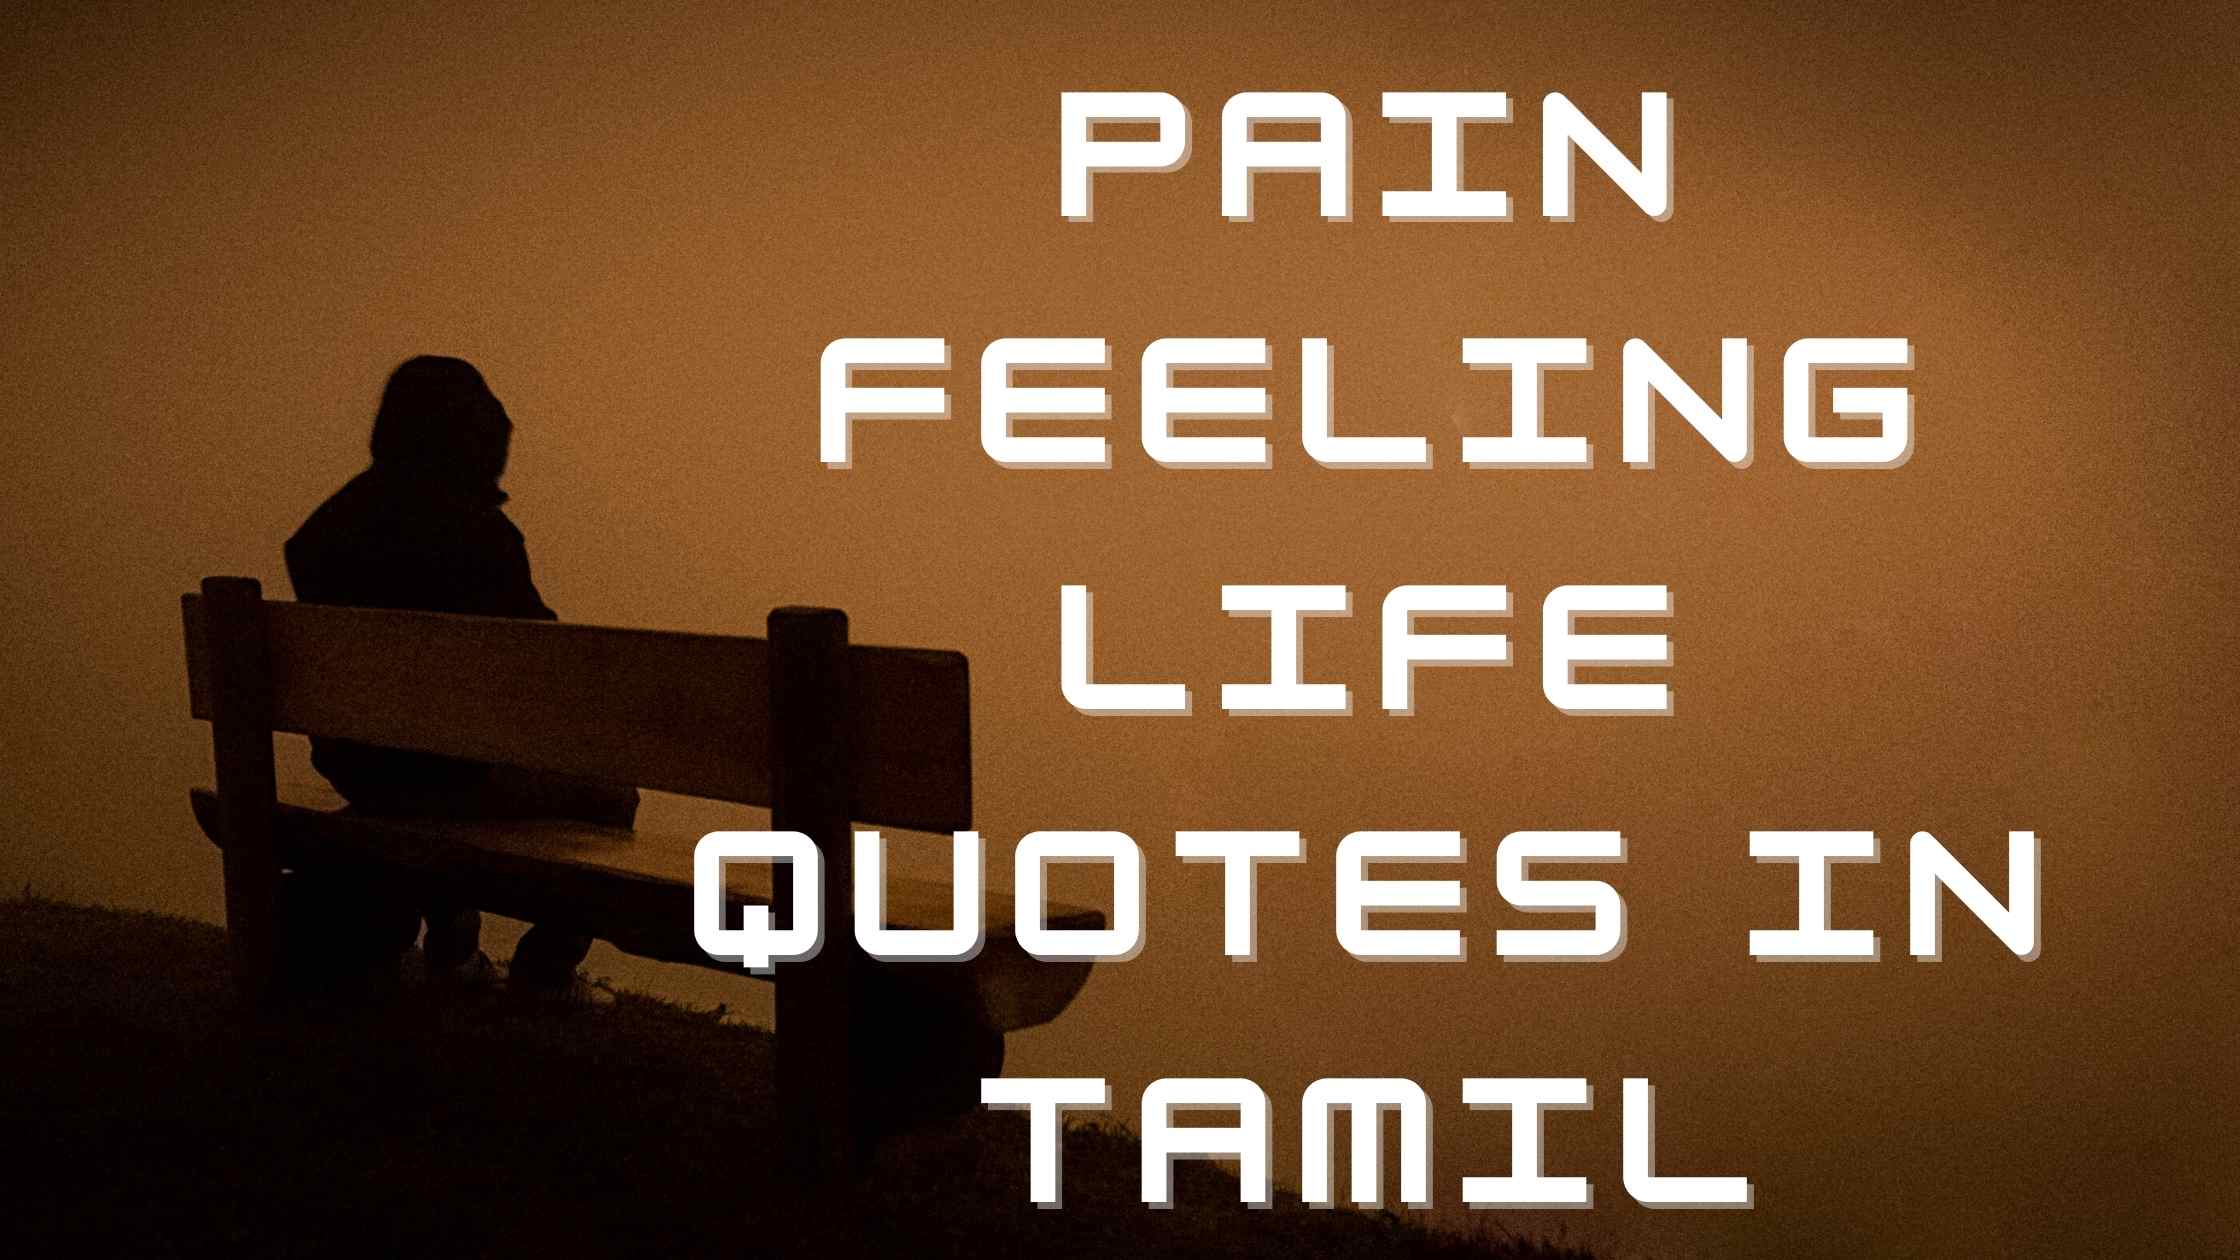 Pain Feeling Life Quotes in Tamil